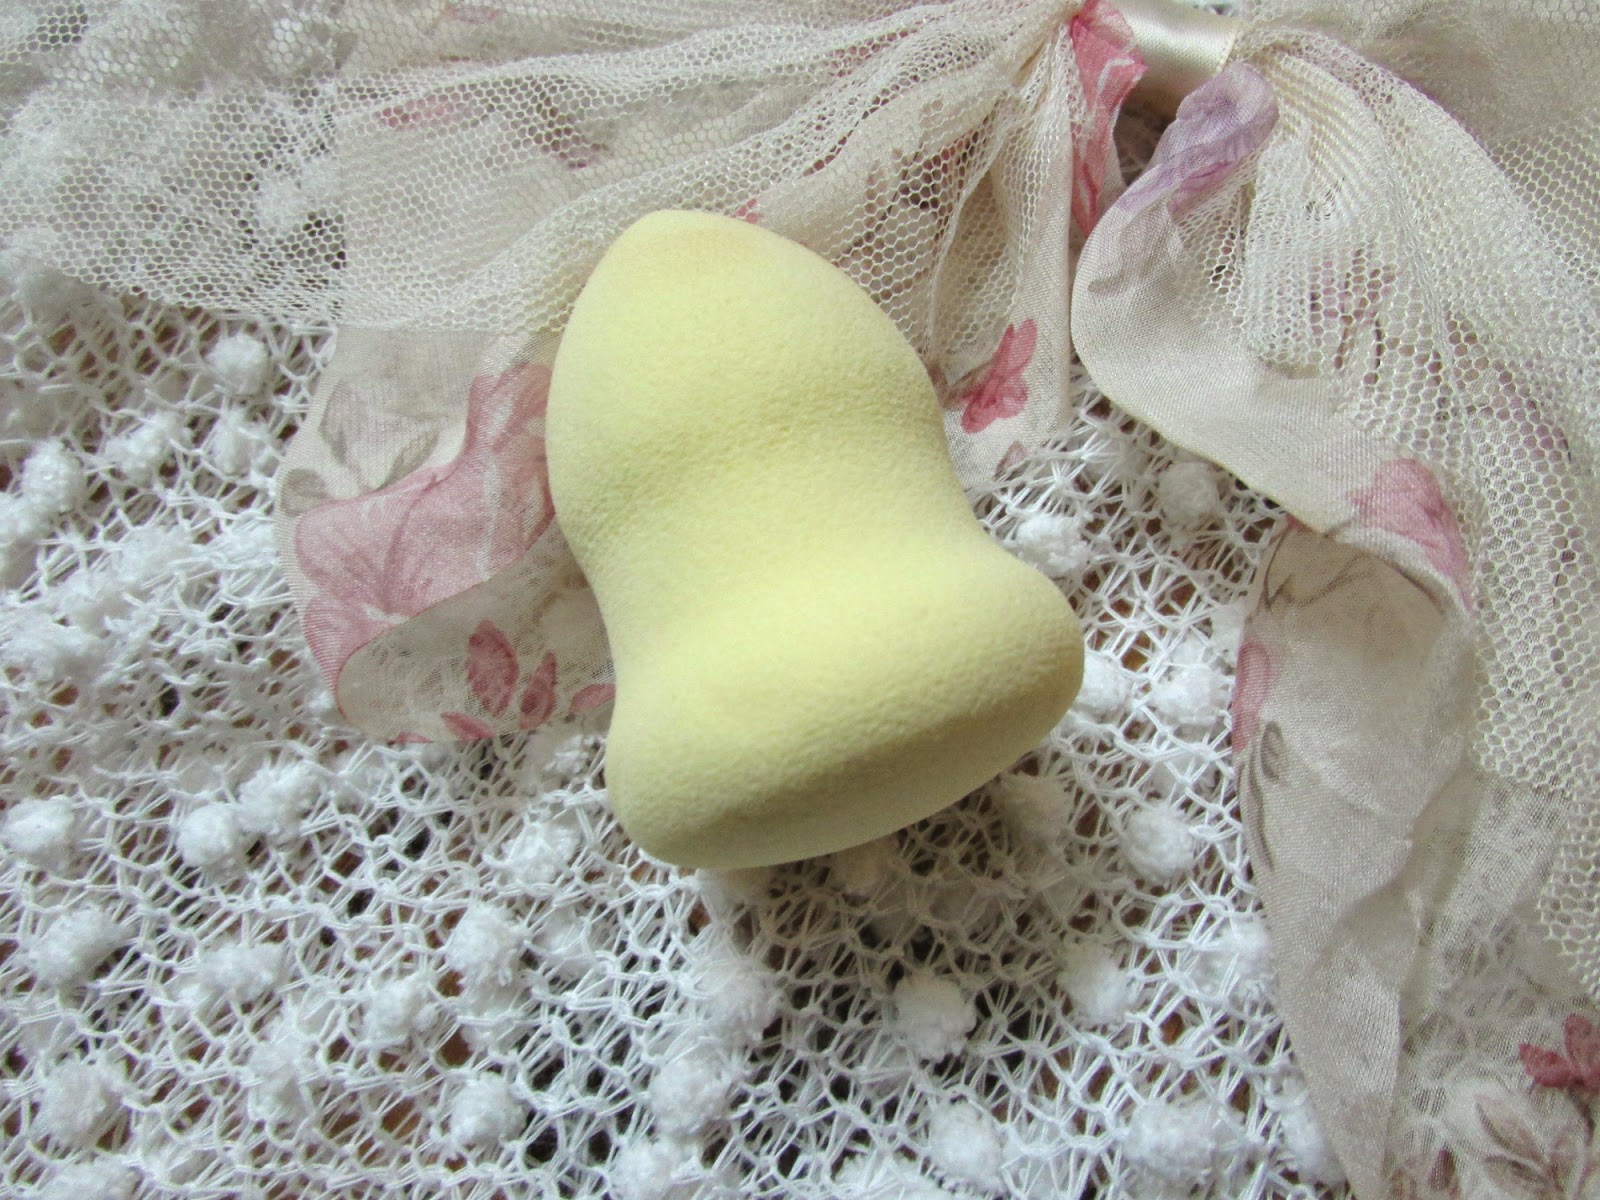 Cheap dupe for beauty blender, beauty blender dupe, cheap beauty blender, exact duper for beauty blender, Forever 21 Beauty Sponge , Forever 21 Beauty Sponge  review, Forever 21 Beauty Sponge  india, Forever 21 Beauty Sponge  price, Forever 21 india,beauty , fashion,beauty and fashion,beauty blog, fashion blog , indian beauty blog,indian fashion blog, beauty and fashion blog, indian beauty and fashion blog, indian bloggers, indian beauty bloggers, indian fashion bloggers,indian bloggers online, top 10 indian bloggers, top indian bloggers,top 10 fashion bloggers, indian bloggers on blogspot,home remedies, how to